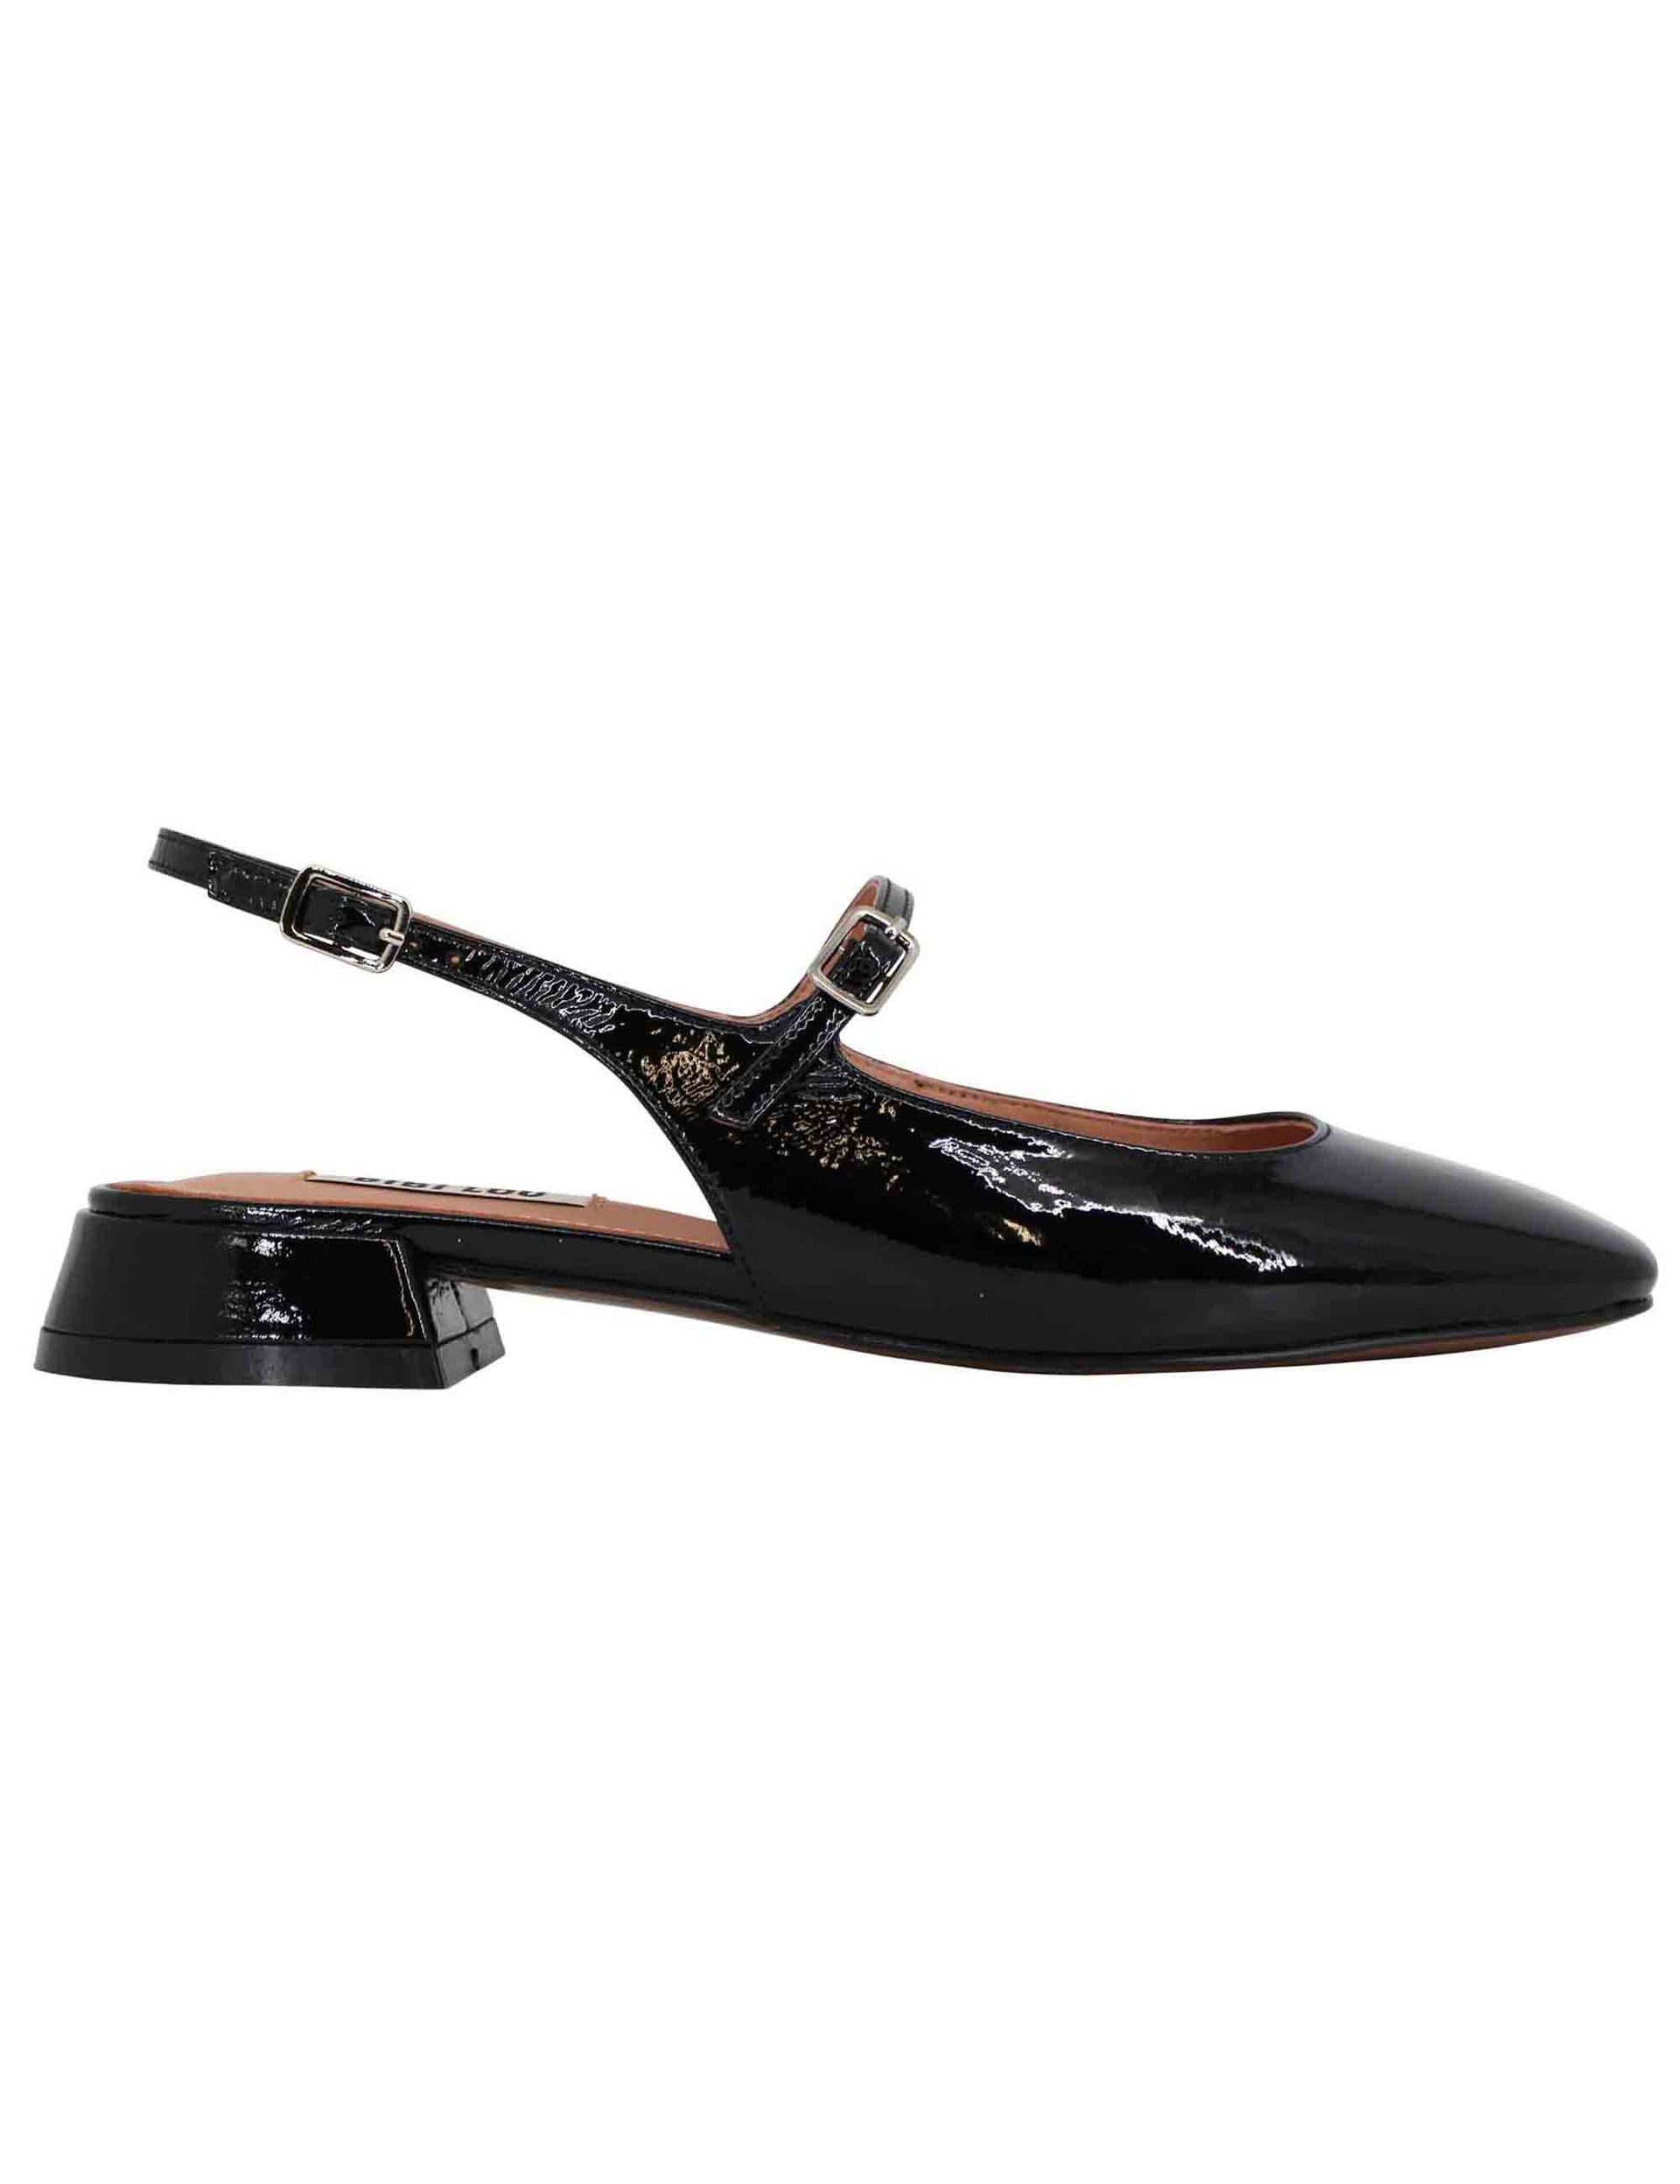 Women's slingback pumps in black patent leather with strap on the instep Ava